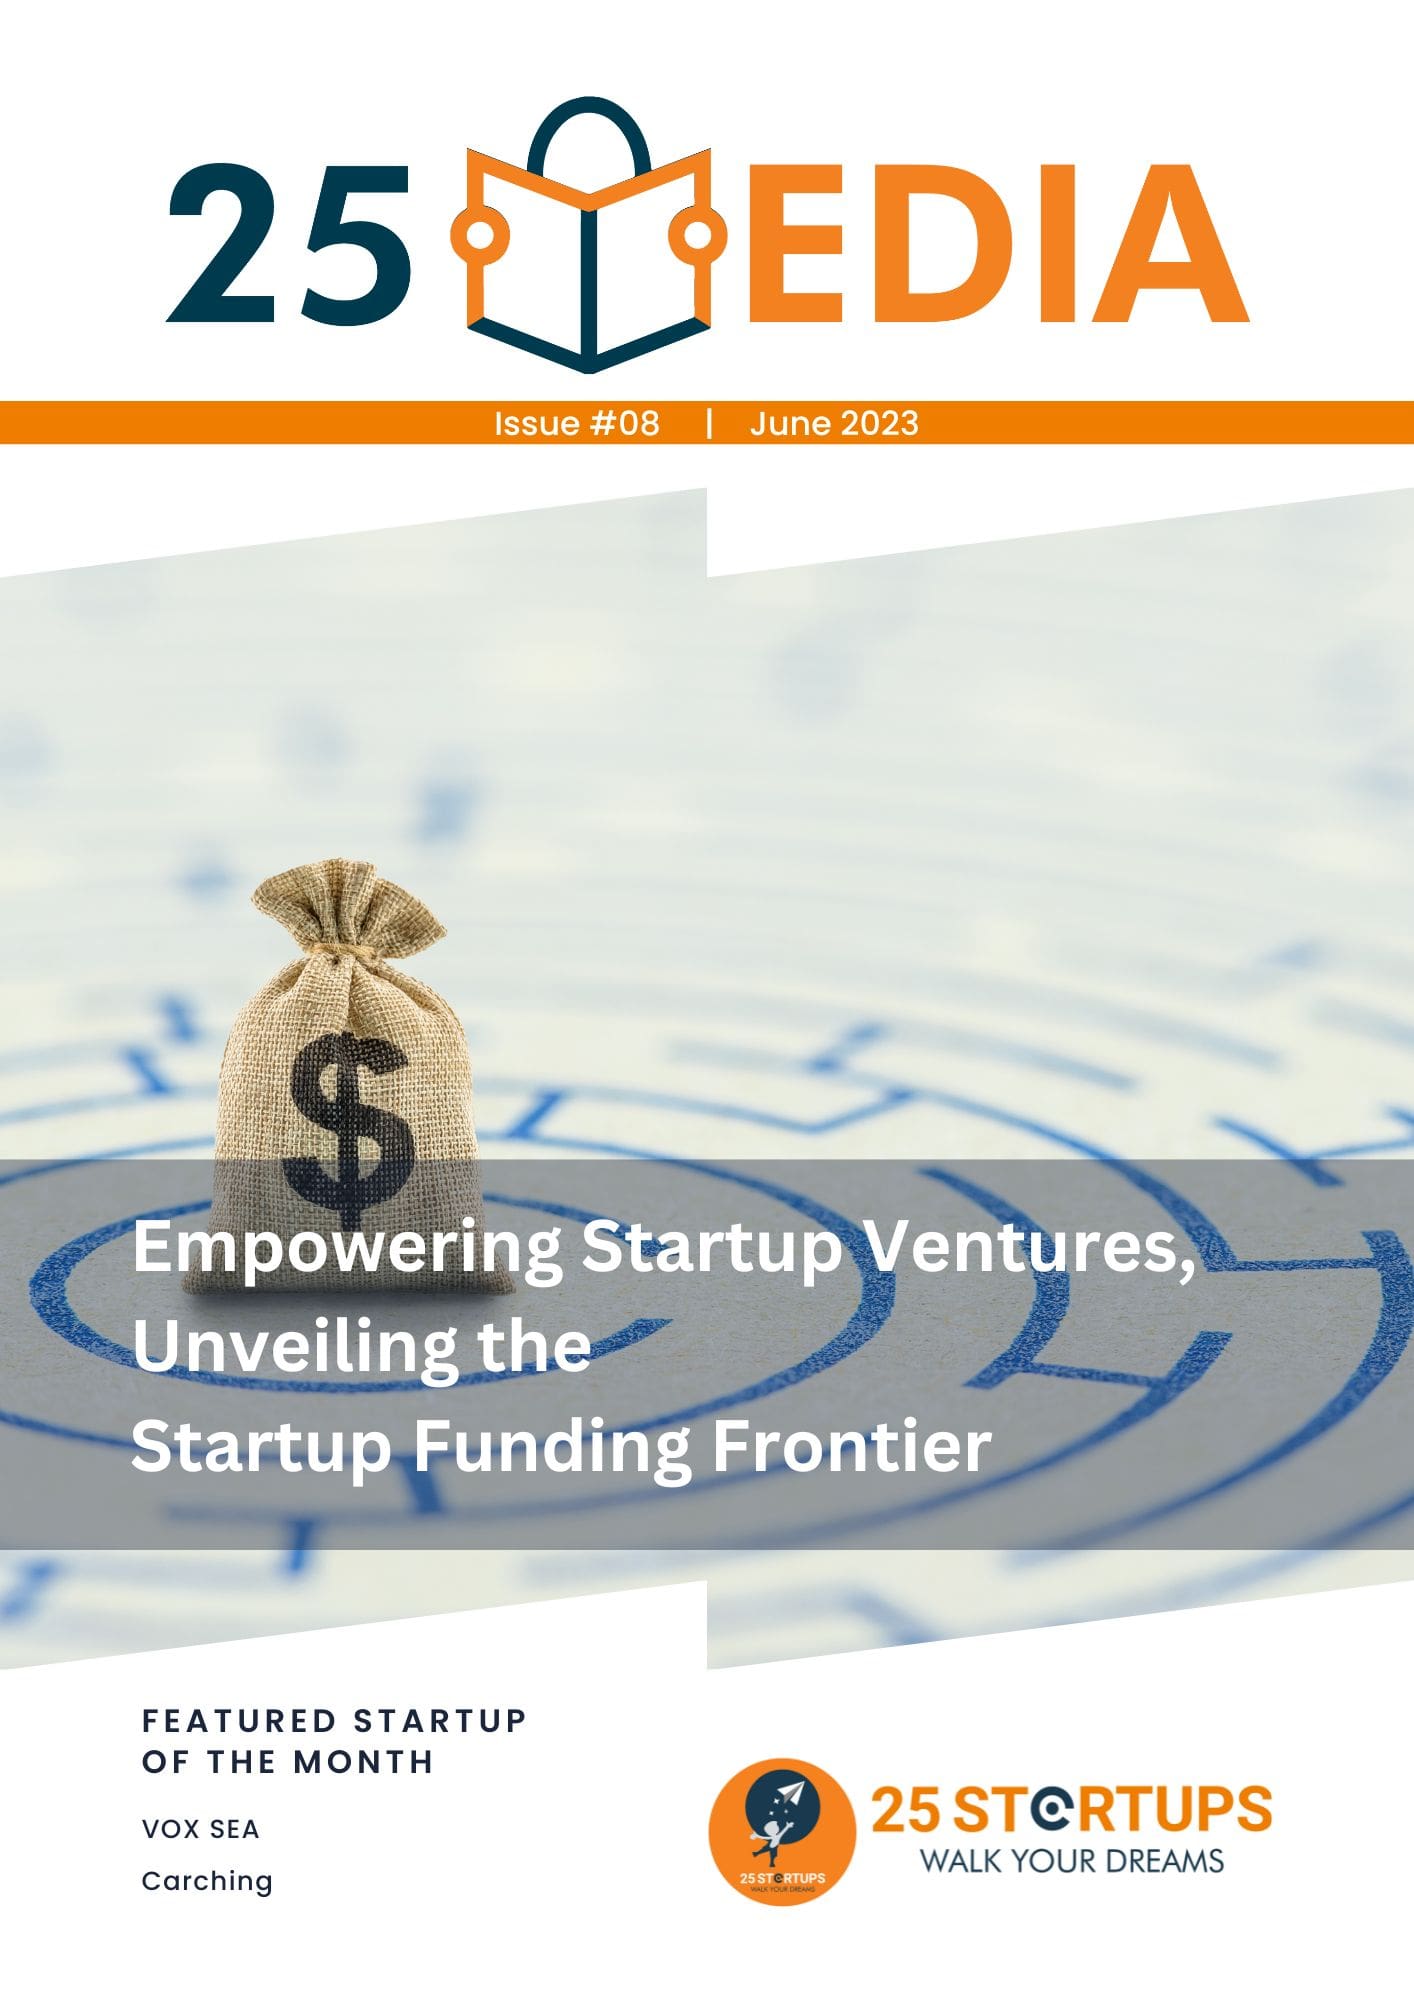 25 Media Issue #08: Empowering Startup Ventures, Unveiling The Startup Funding Frontier